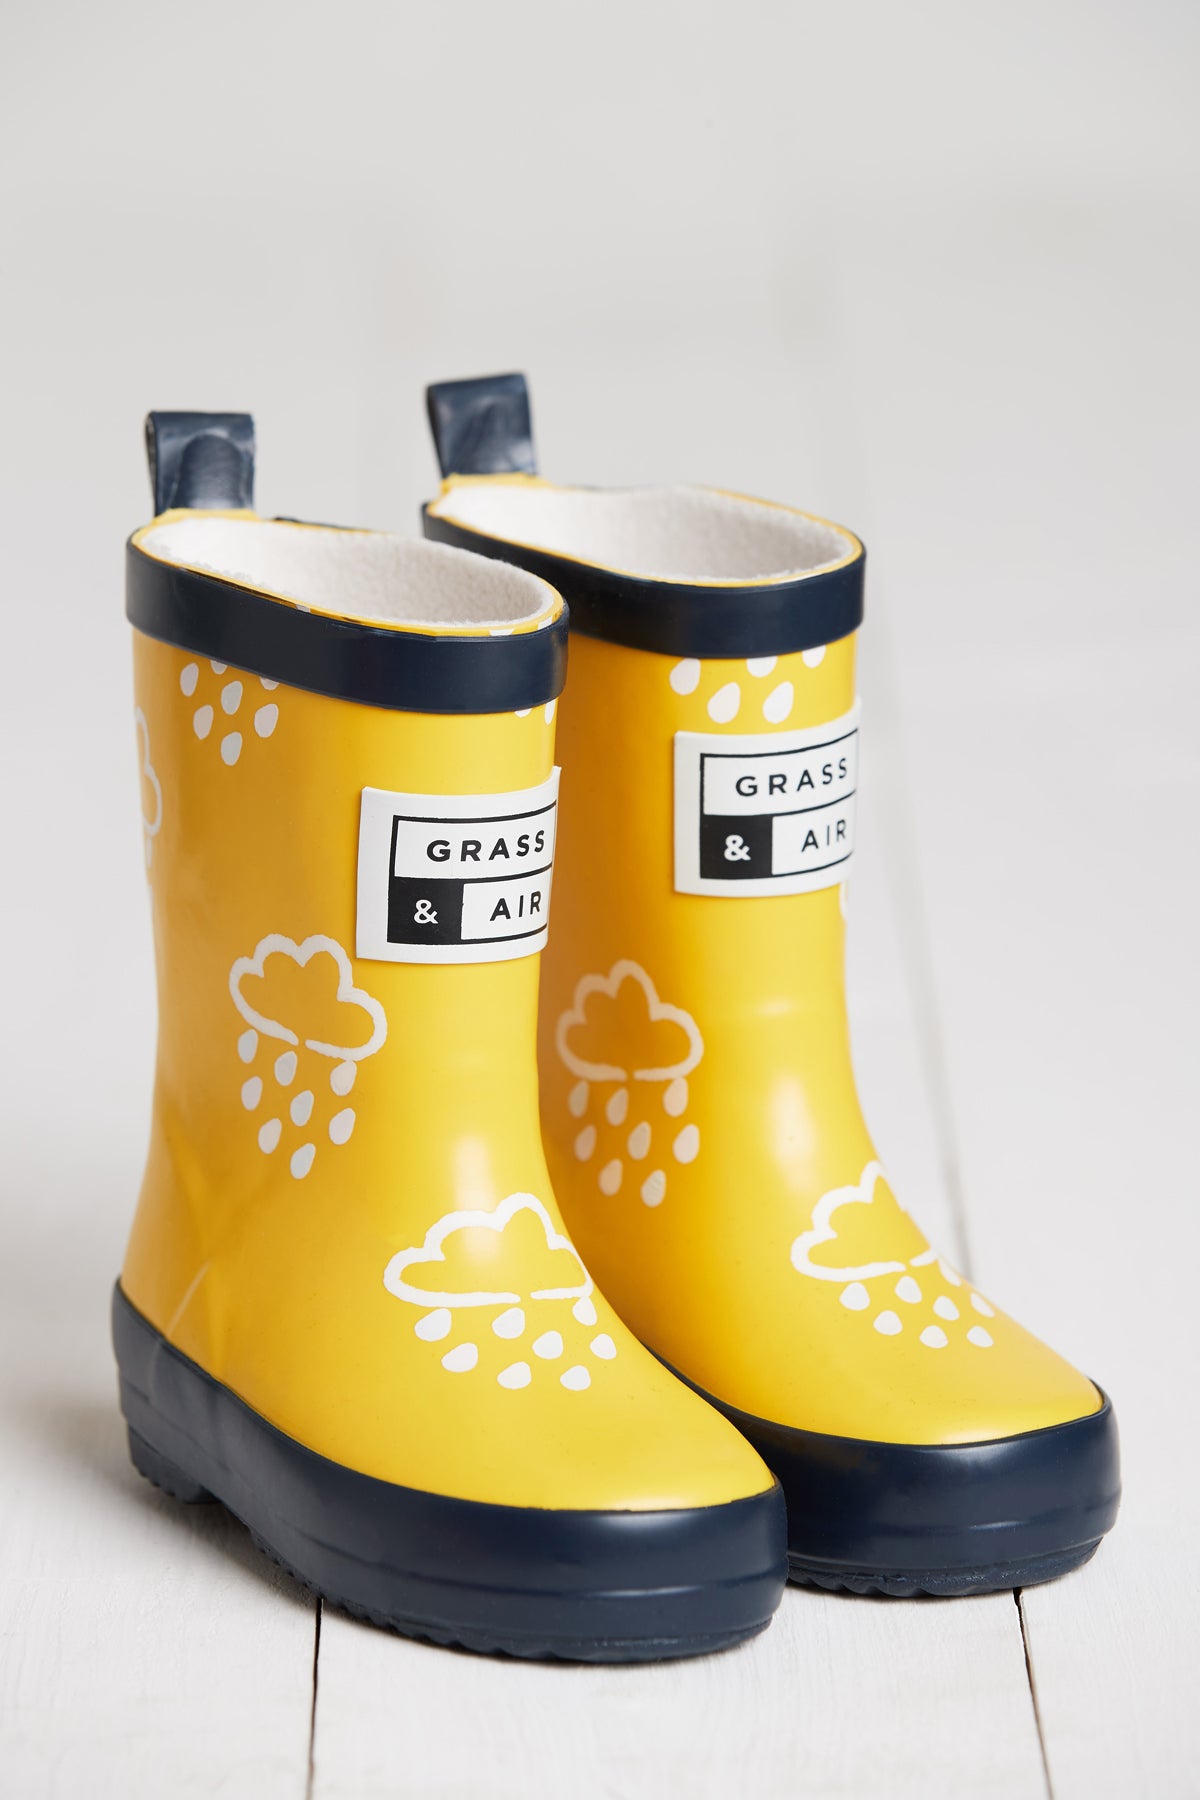 GRASS & AIR - Infant Colour Changing Wellies Yellow